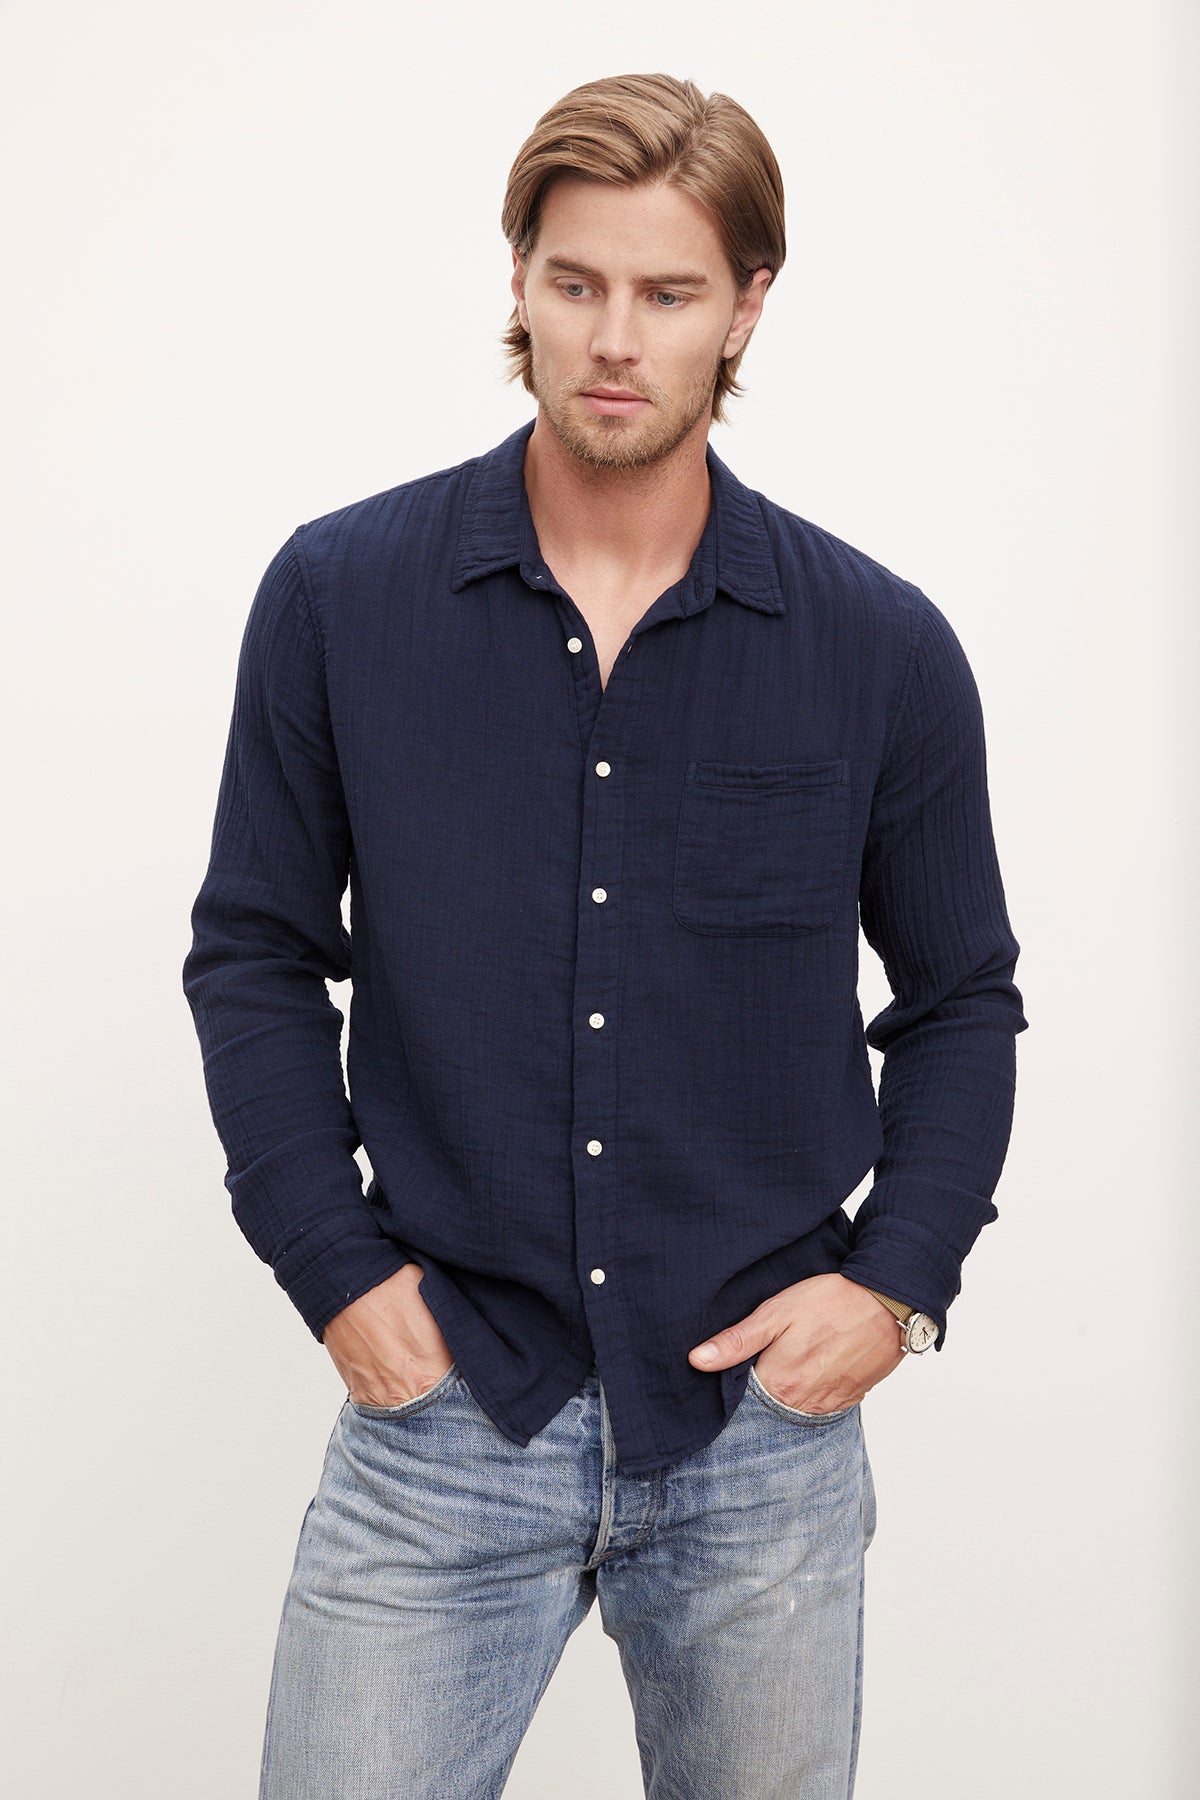 A man wearing casual jeans and a navy Velvet by Graham & Spencer Elton Button-Up Shirt.-36009394897089